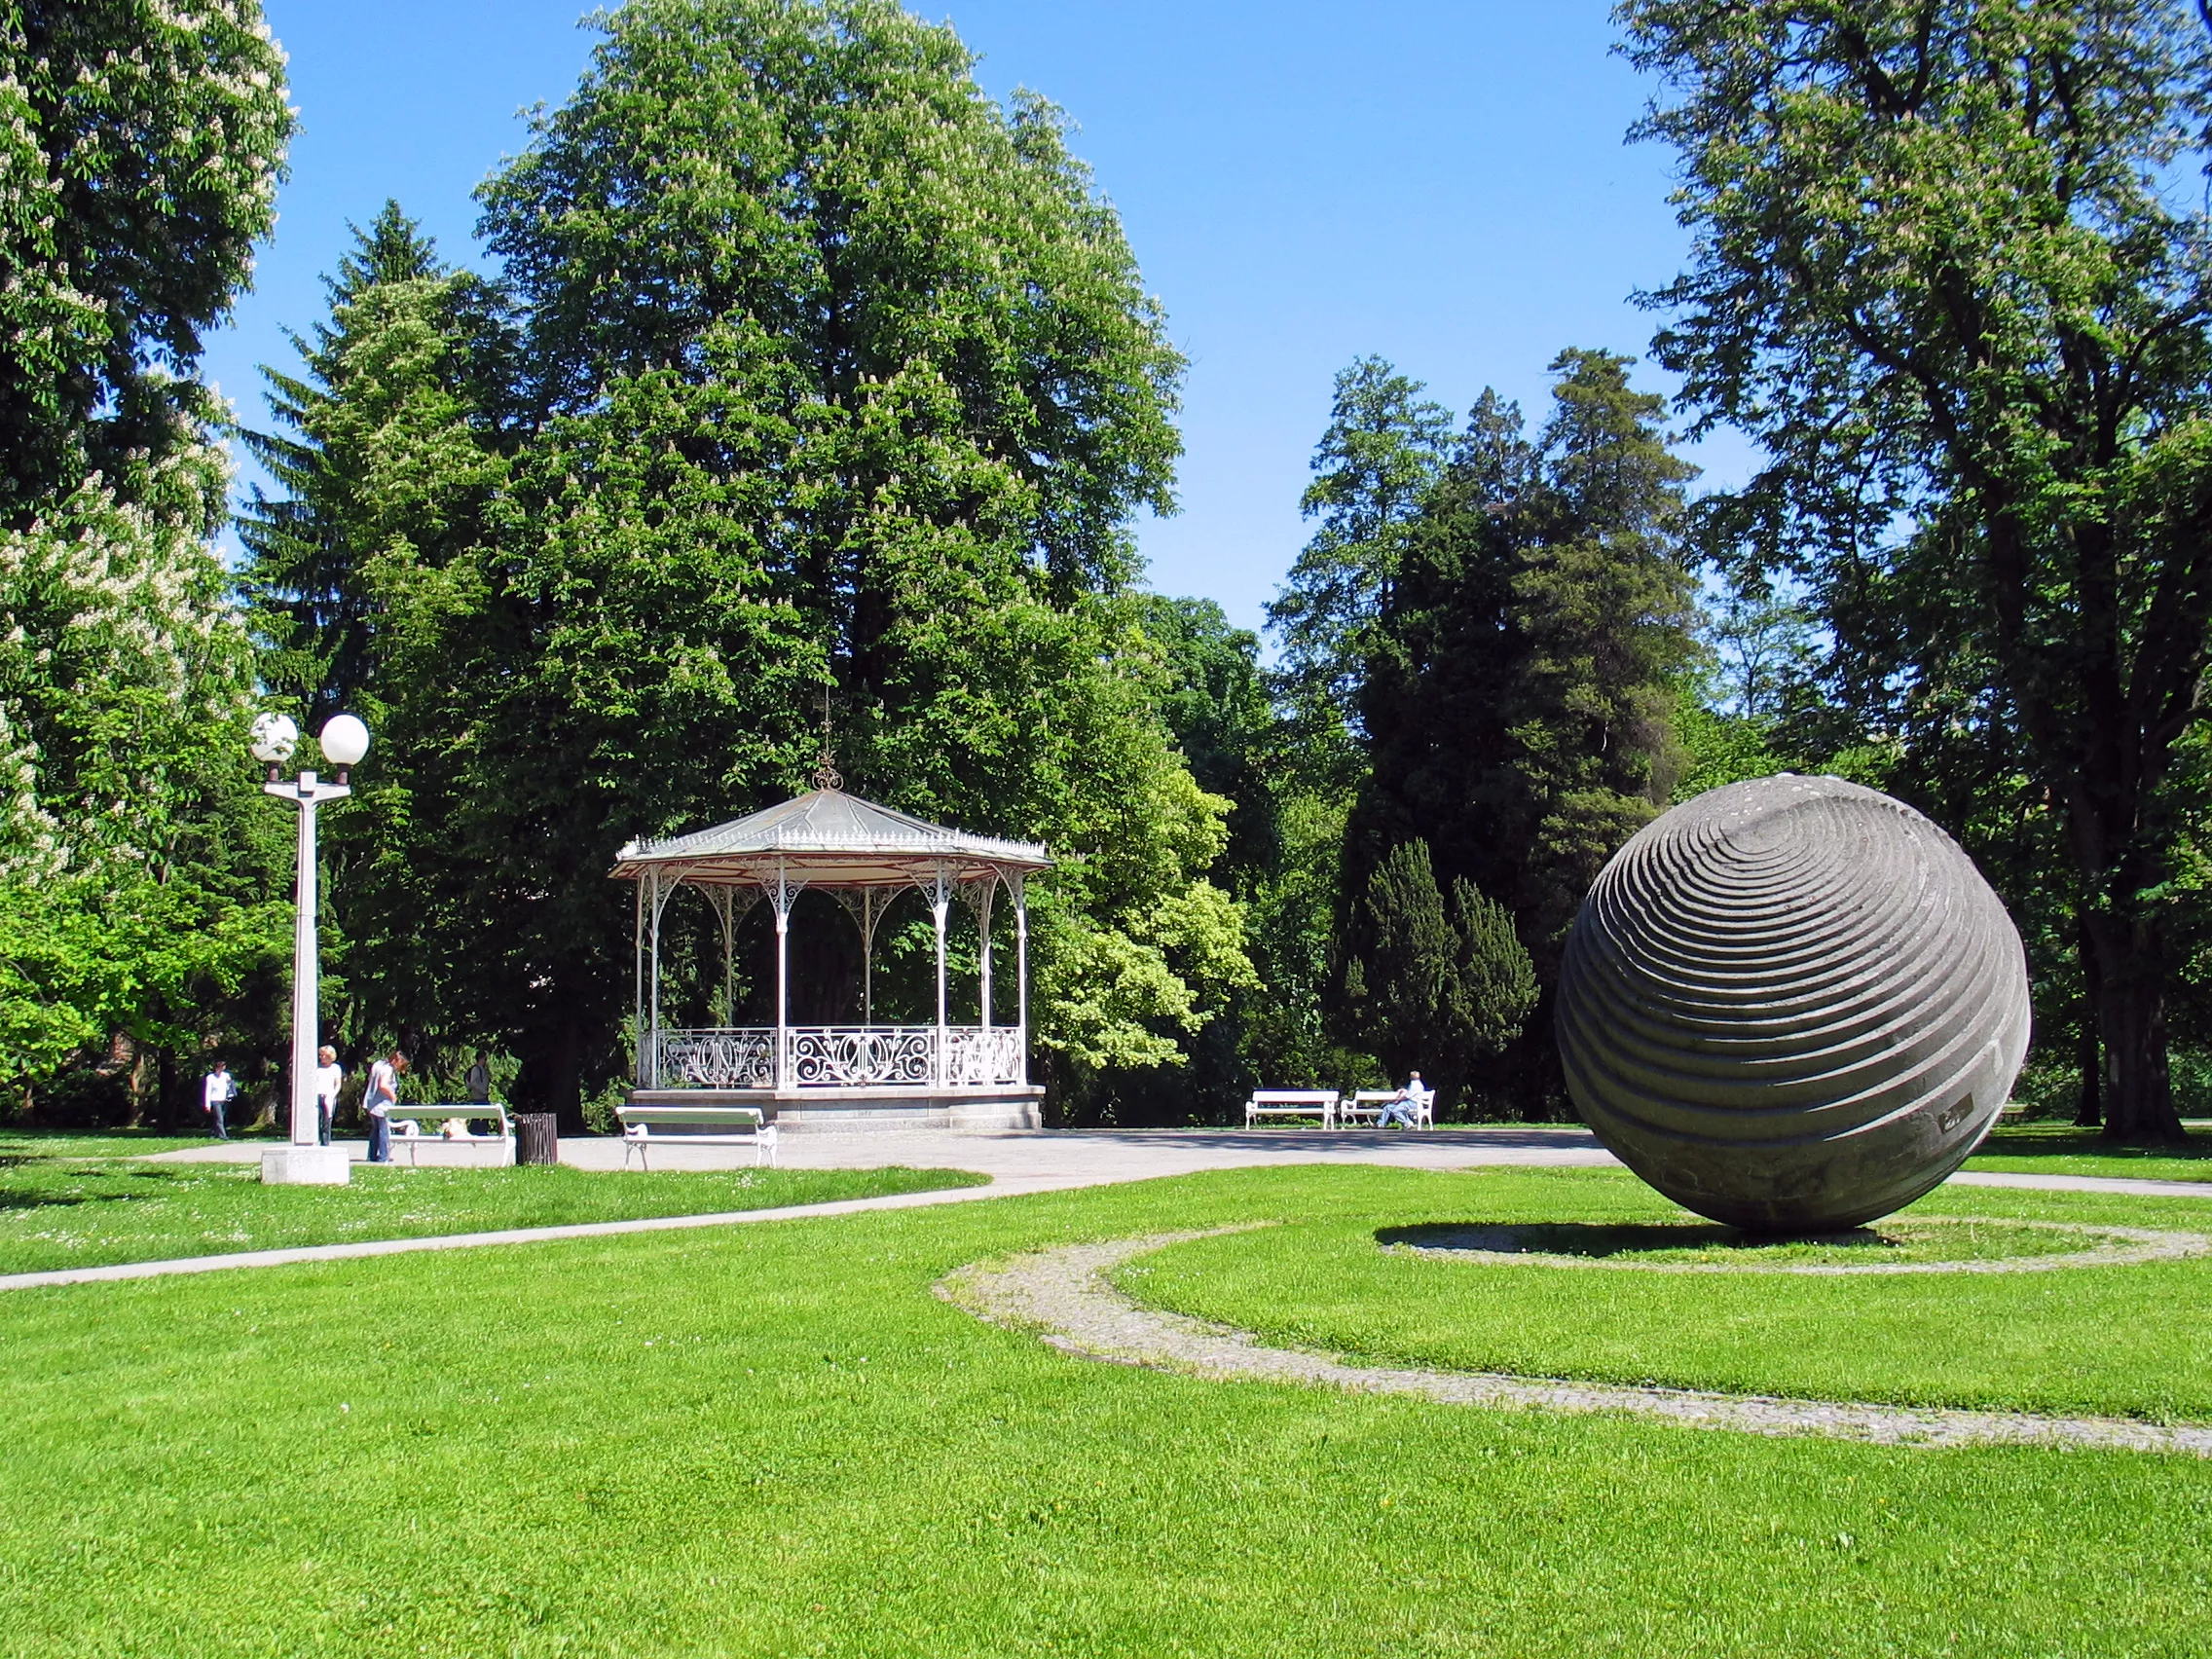 Maribor City Park in Slovenia, Europe | Parks - Rated 0.8